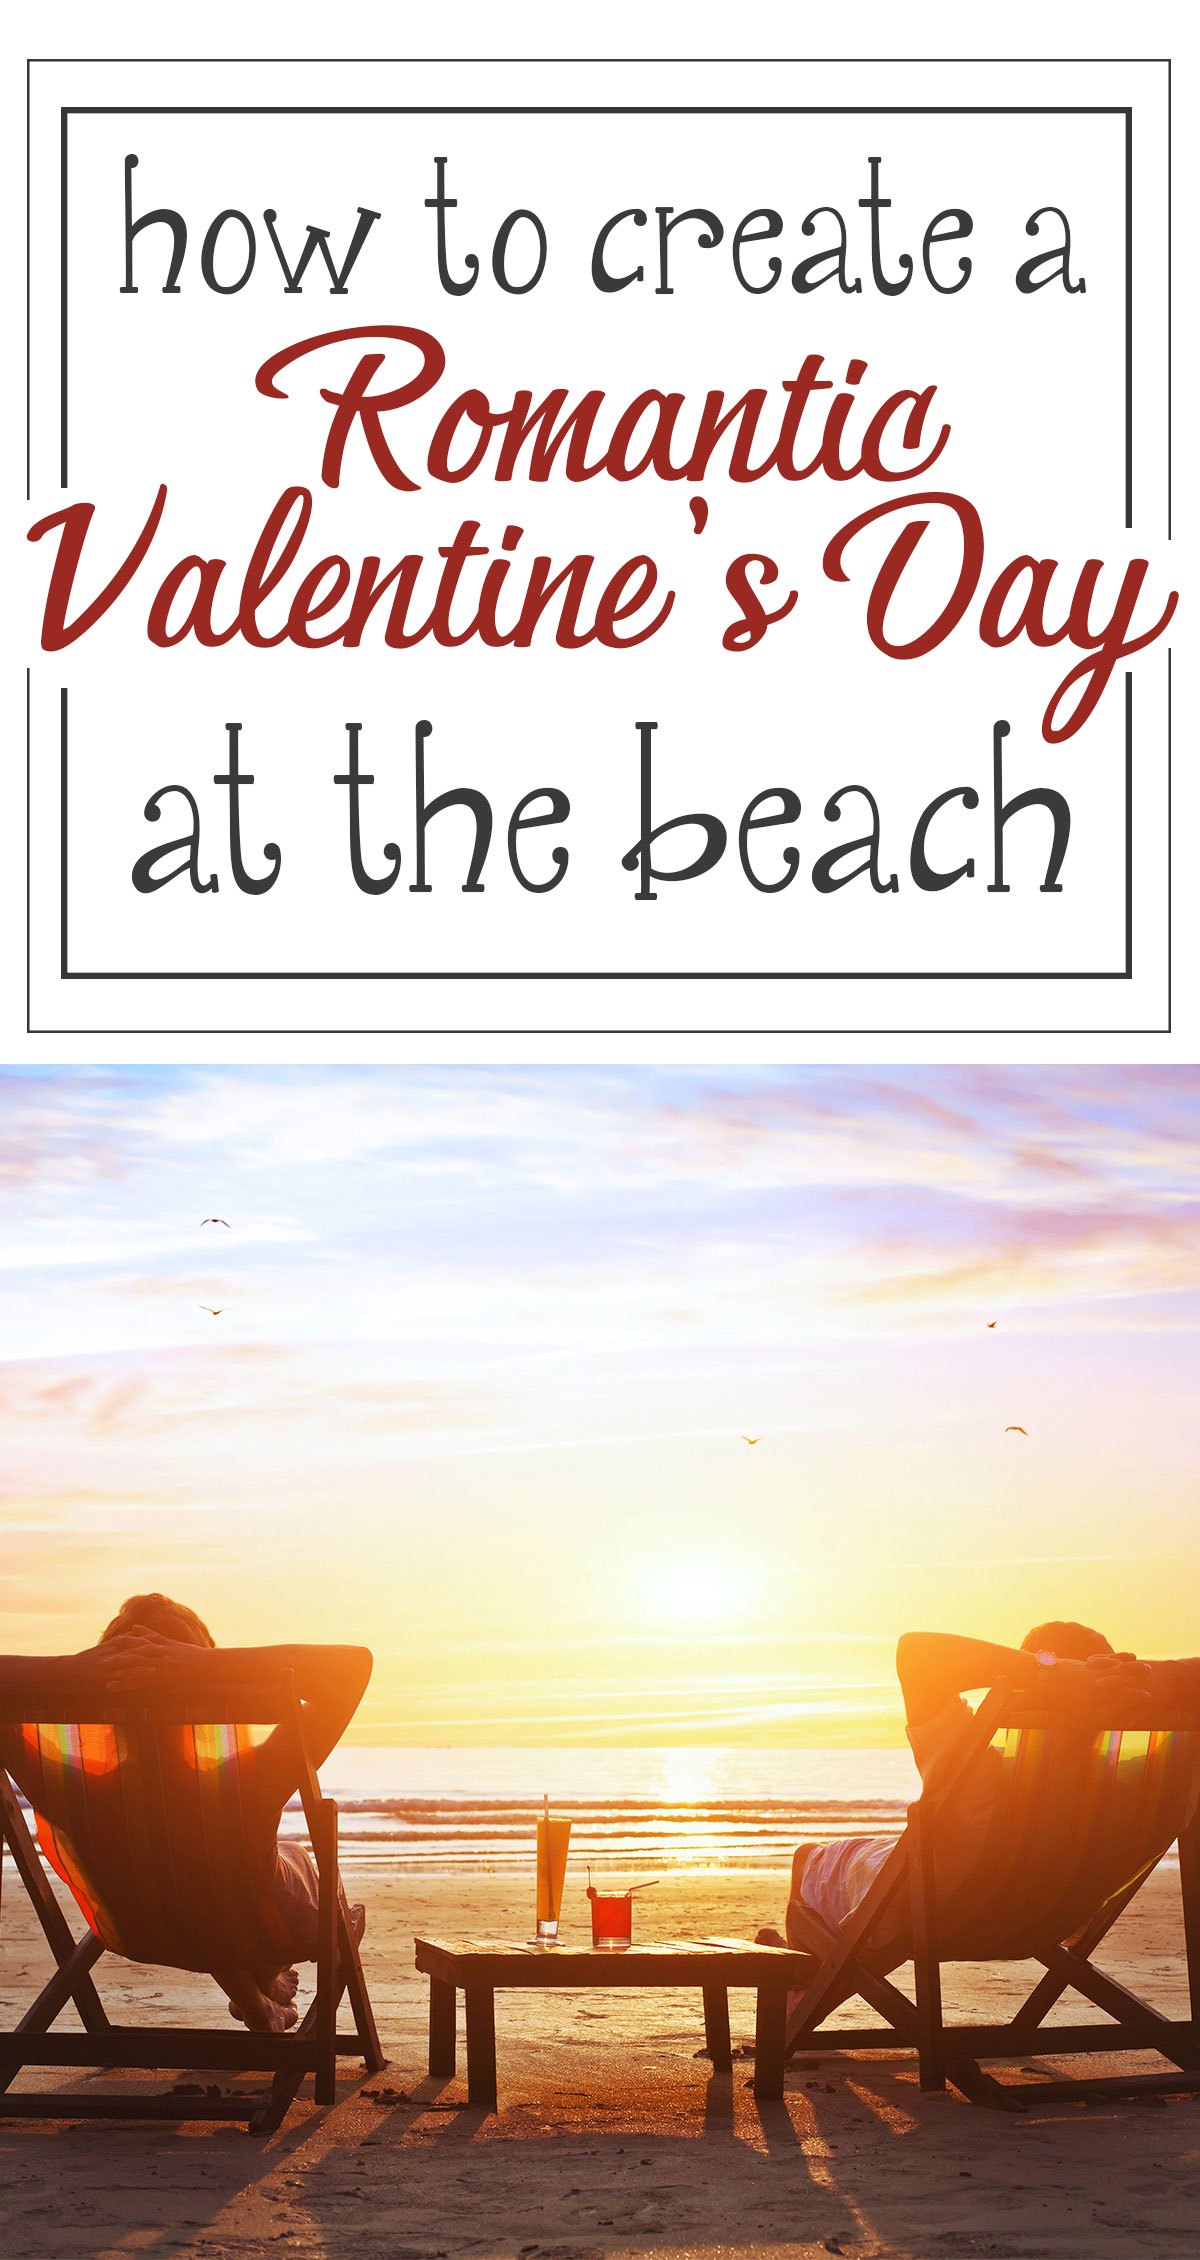 How to Create a Romantic Valentine's Day at the Beach Pin